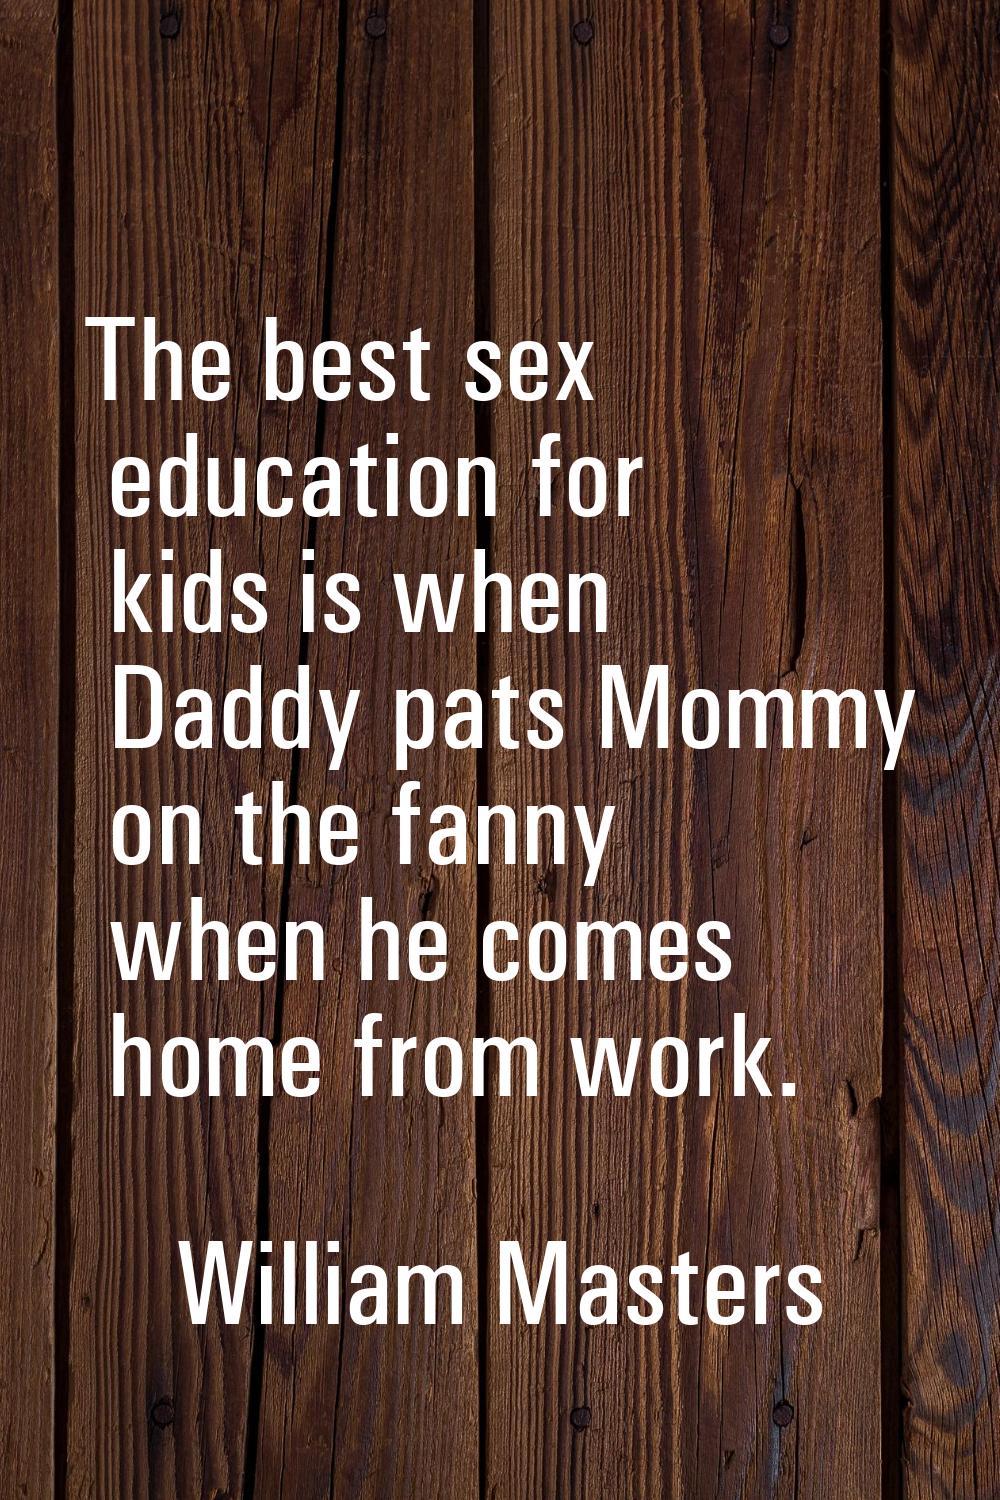 The best sex education for kids is when Daddy pats Mommy on the fanny when he comes home from work.